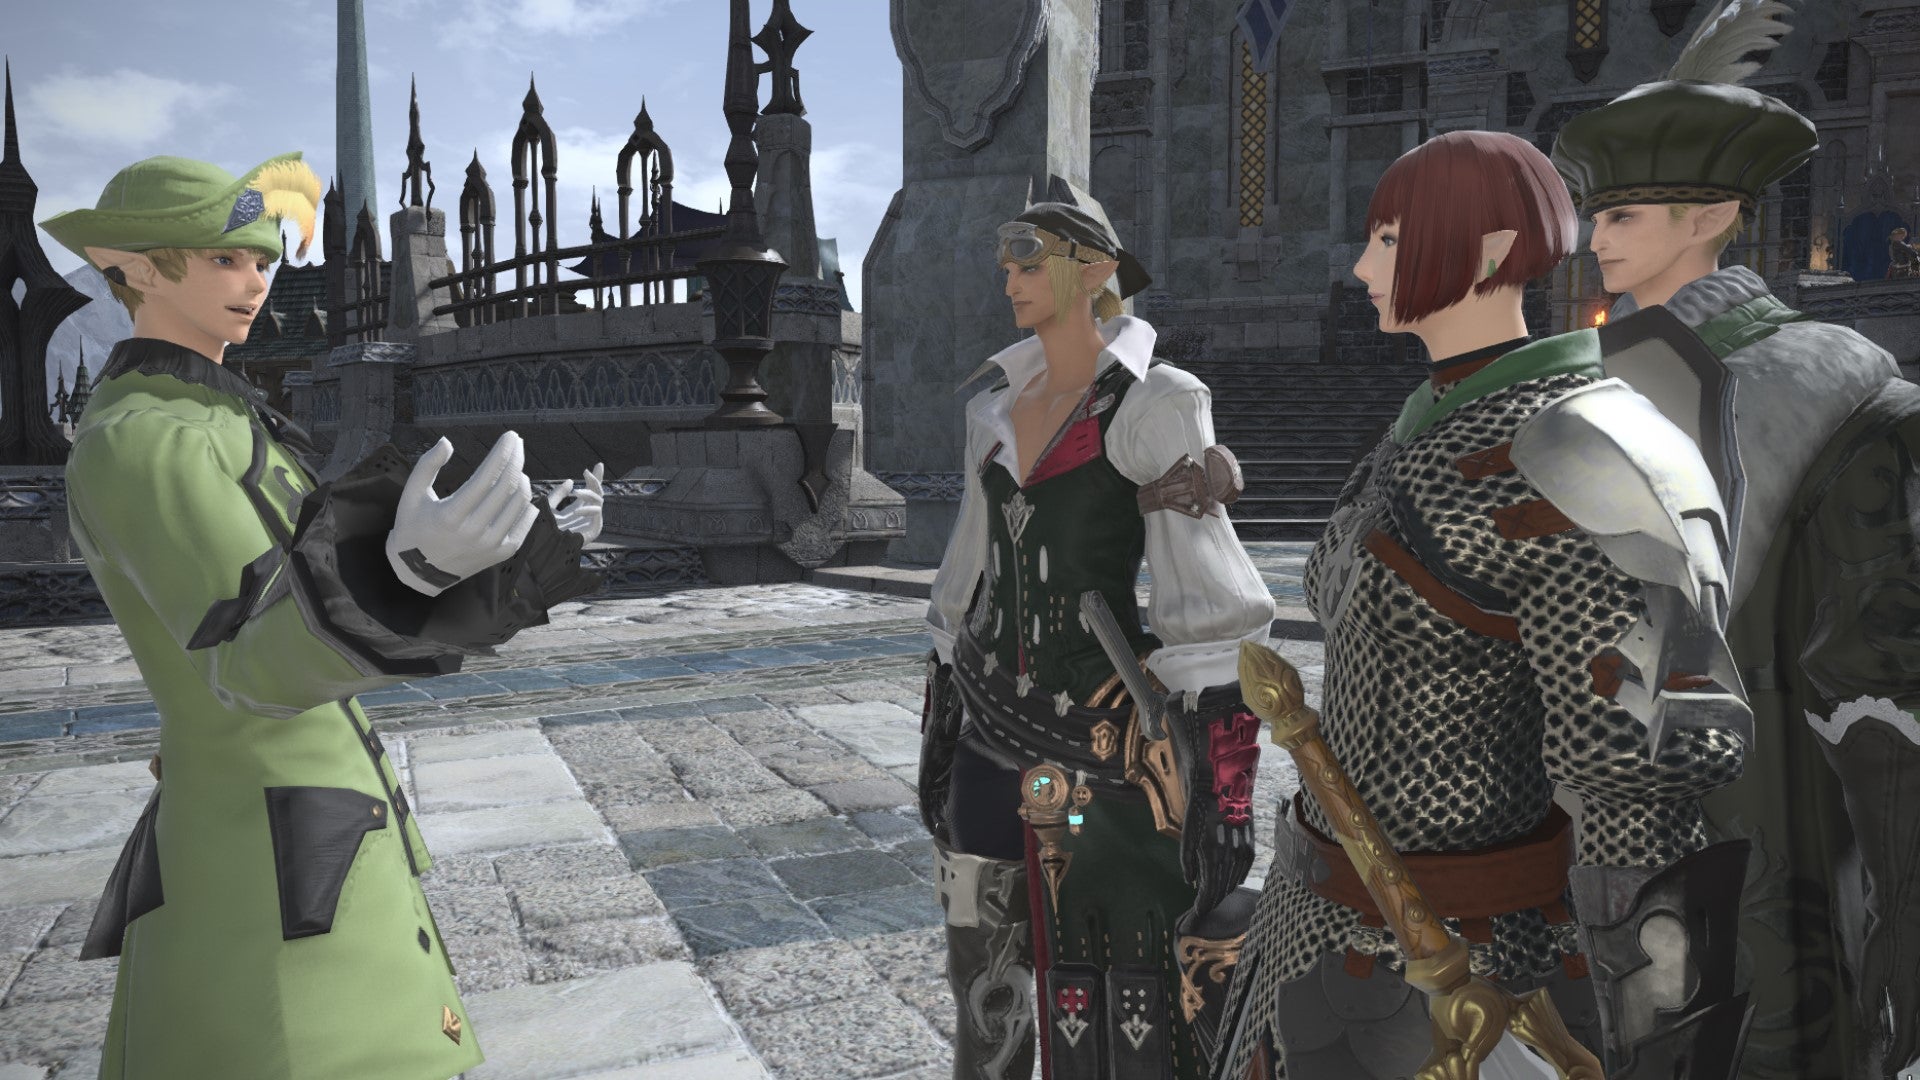 A tour guide speaks to three recruits in Final Fantasy XIV.